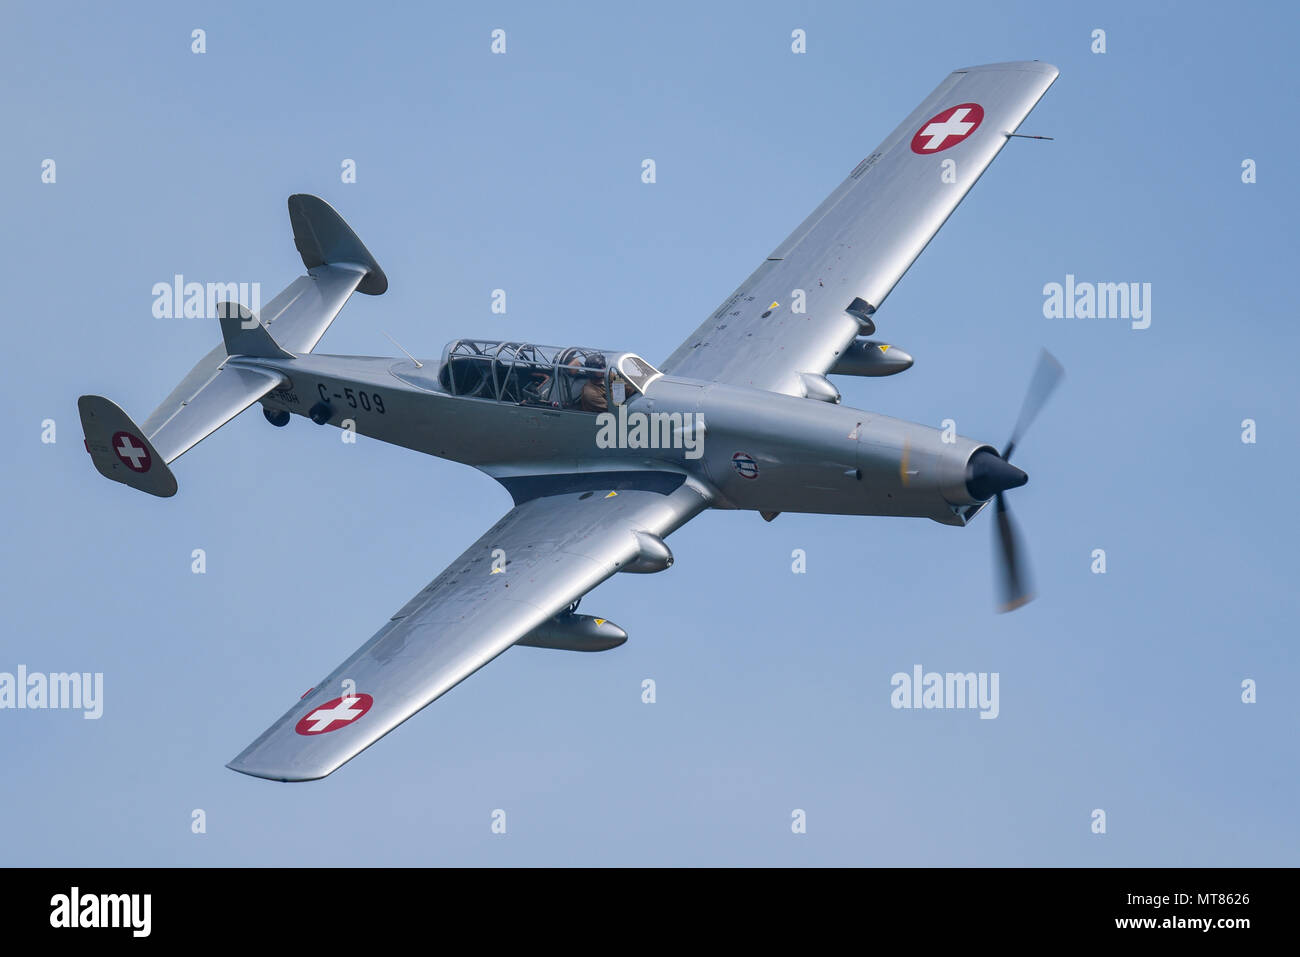 Farner Werke F+W C-3605, nicknamed Schlepp ('Tug') or 'Alpine Anteater' flying at an airshow in blue sky. ex Swiss Air Force Operated by 46 Aviation Stock Photo